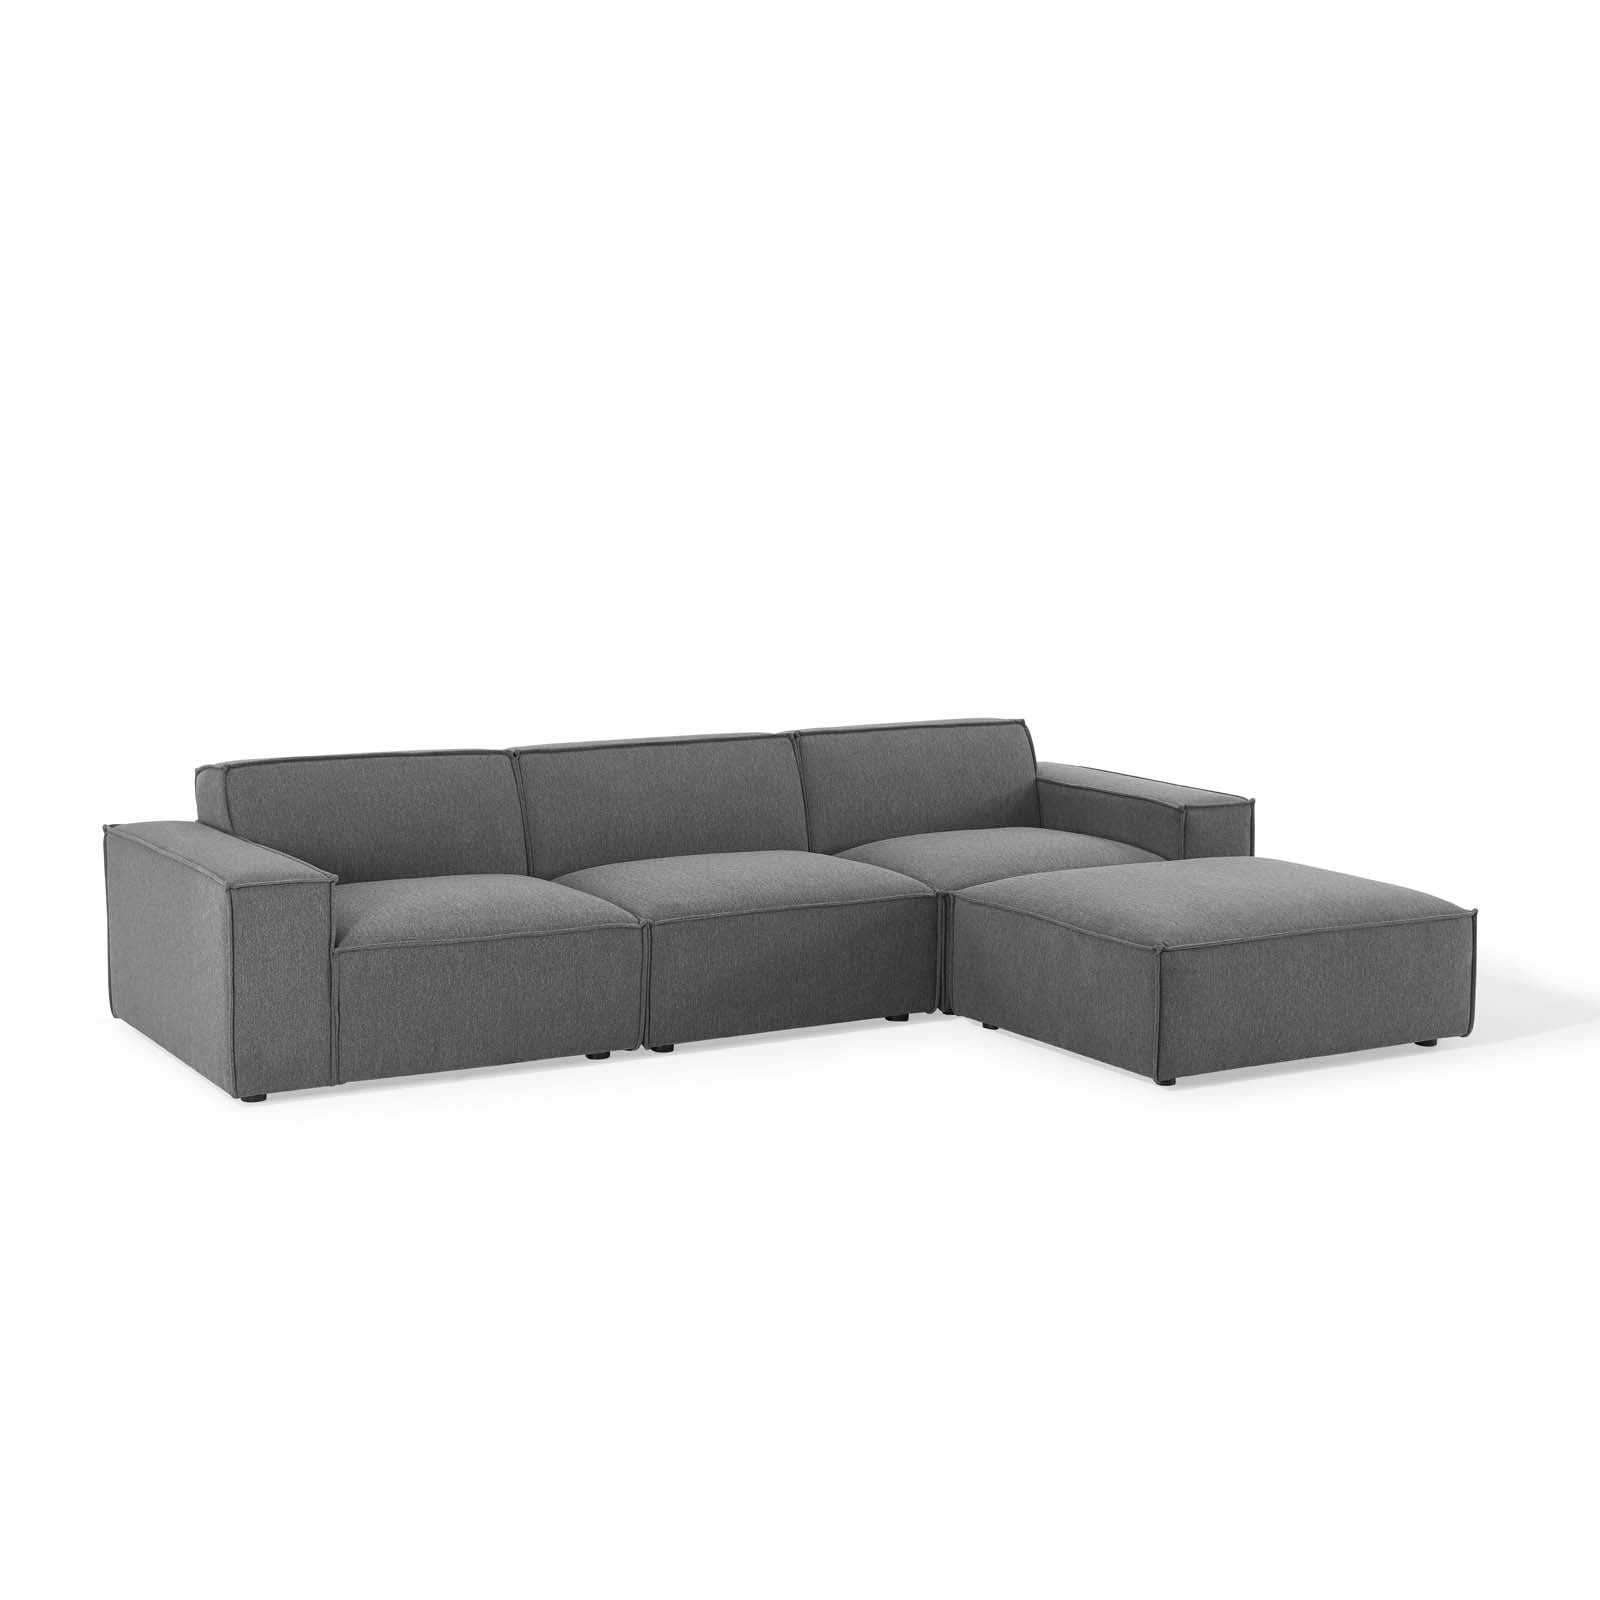 Modway Sectional Sofas - Restore 4-Piece Sectional Sofa Charcoal